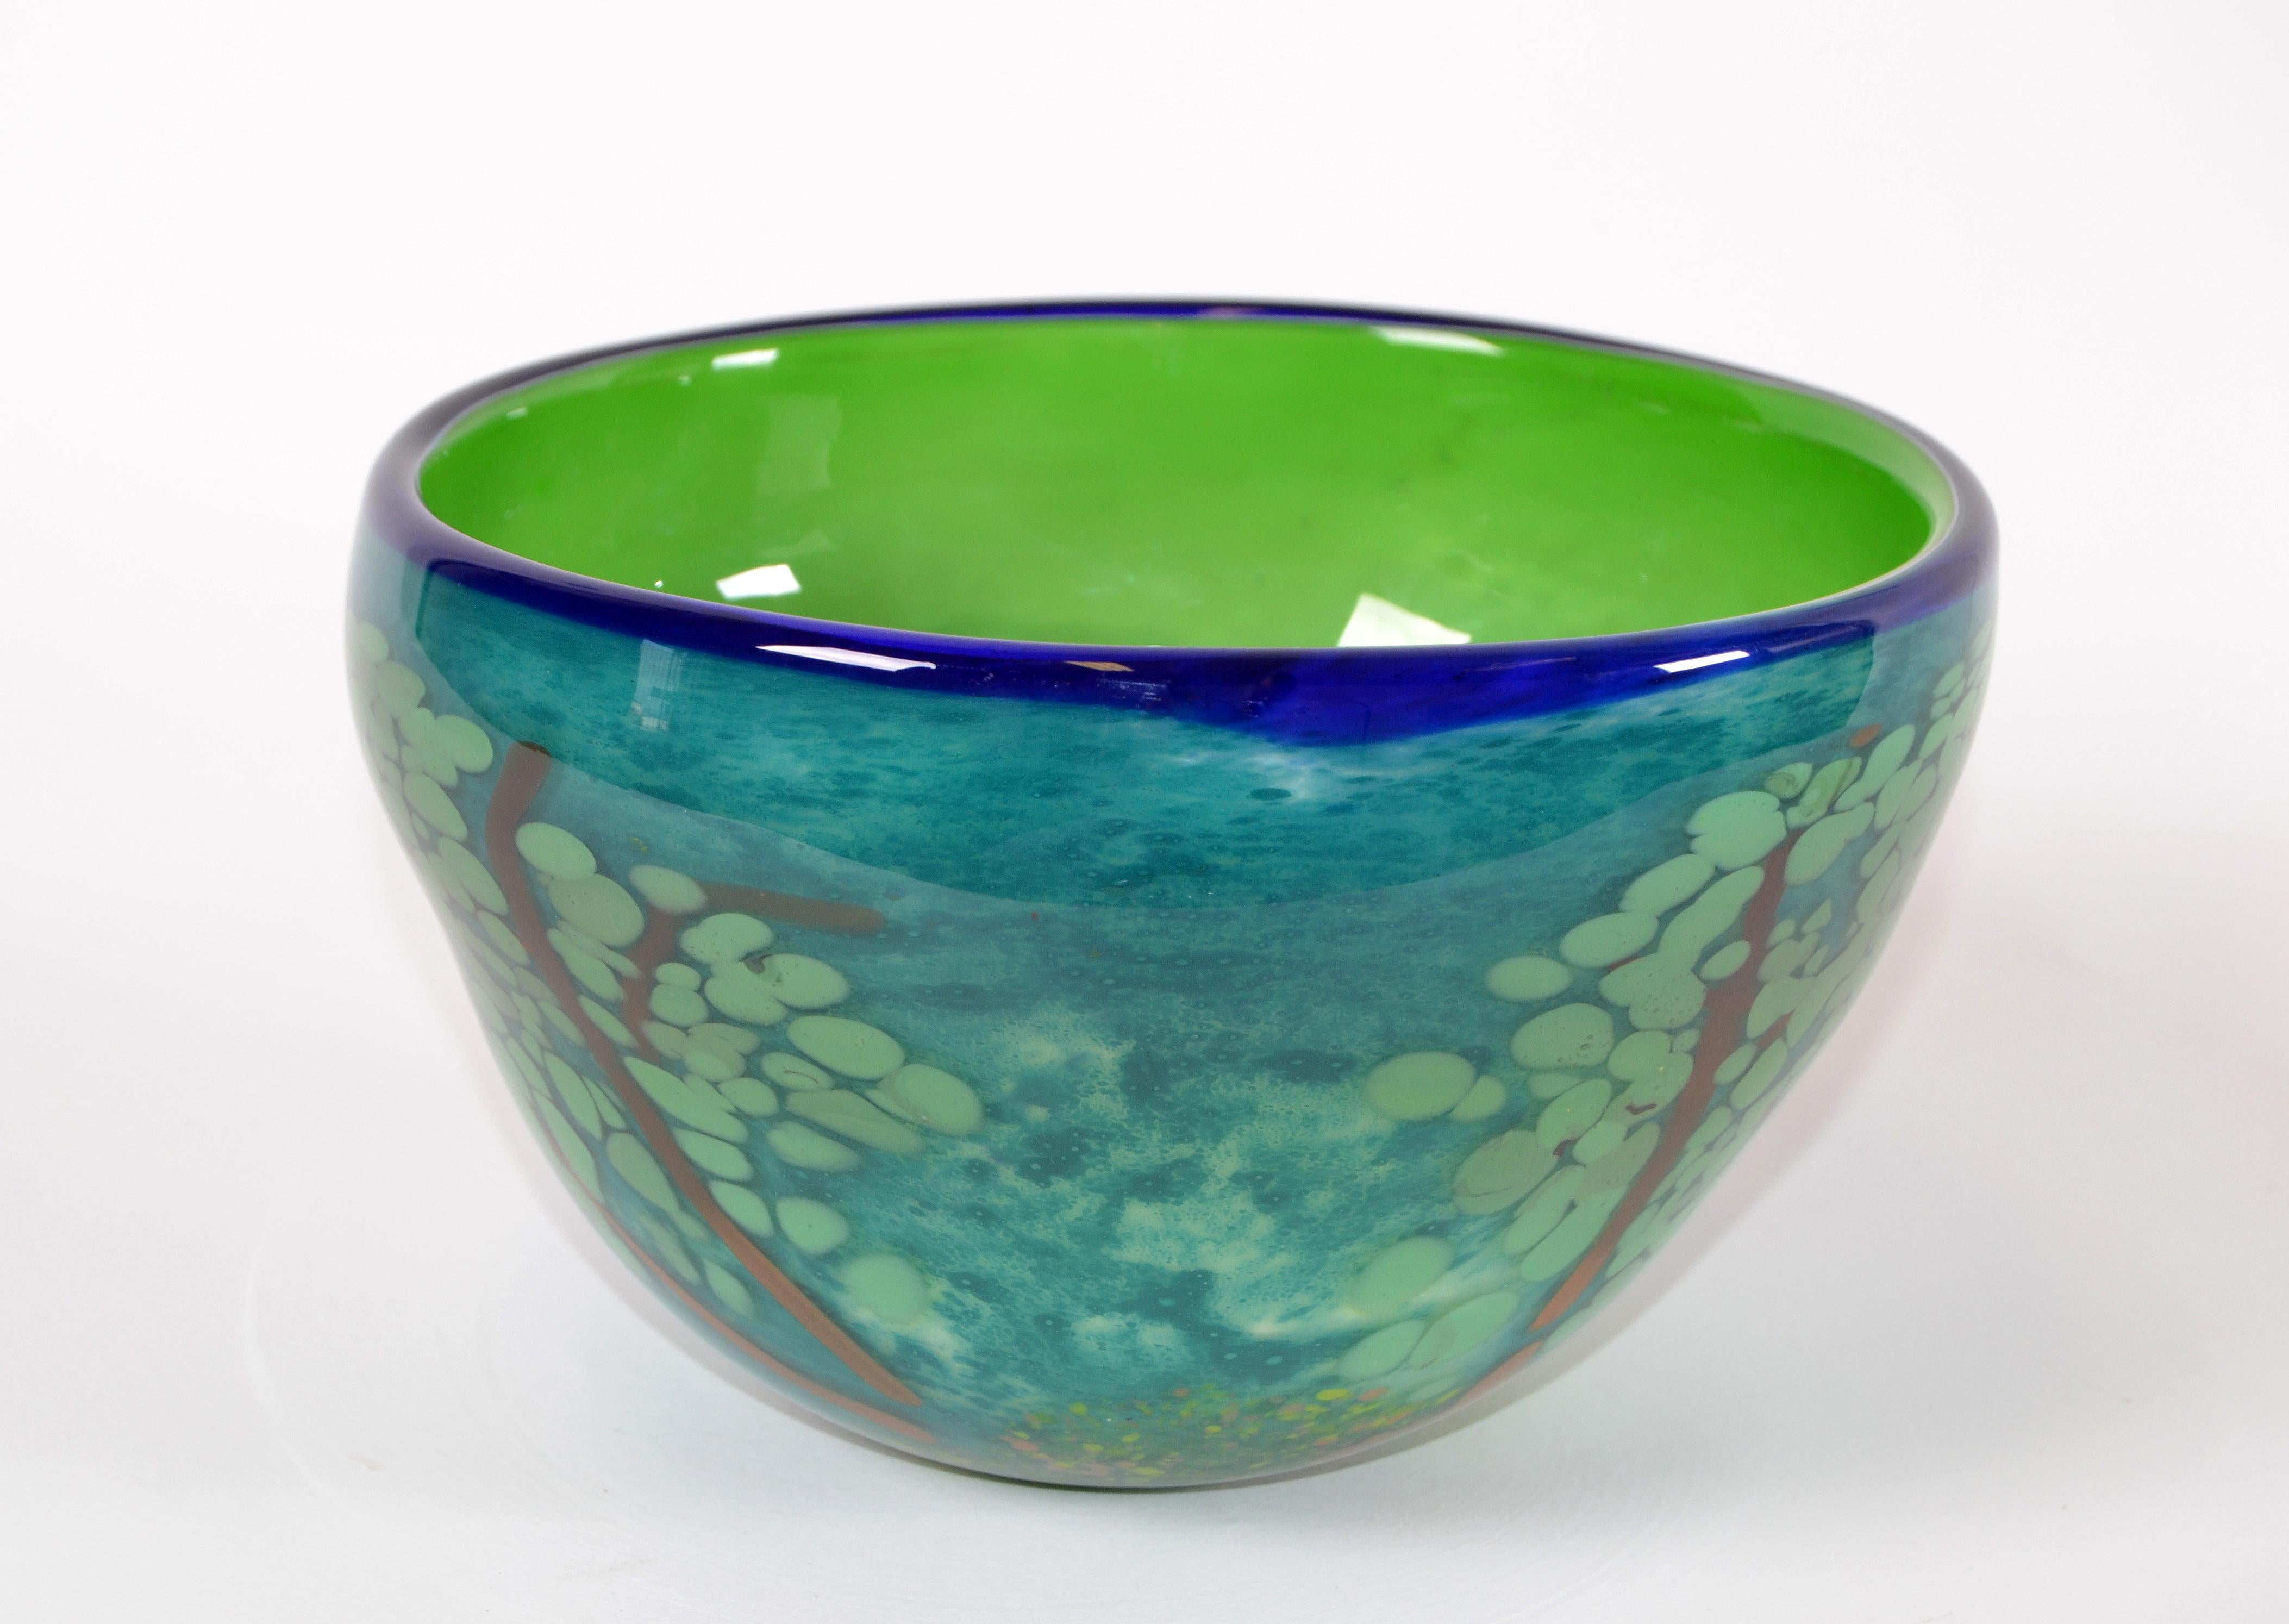 A heavy Mid-Century Modern handmade art glass centerpiece or fruit bowl.
Rich green and blue coloring depicts a tree with leaves on each side in 3D effect.
Great rare craftsmanship.
       